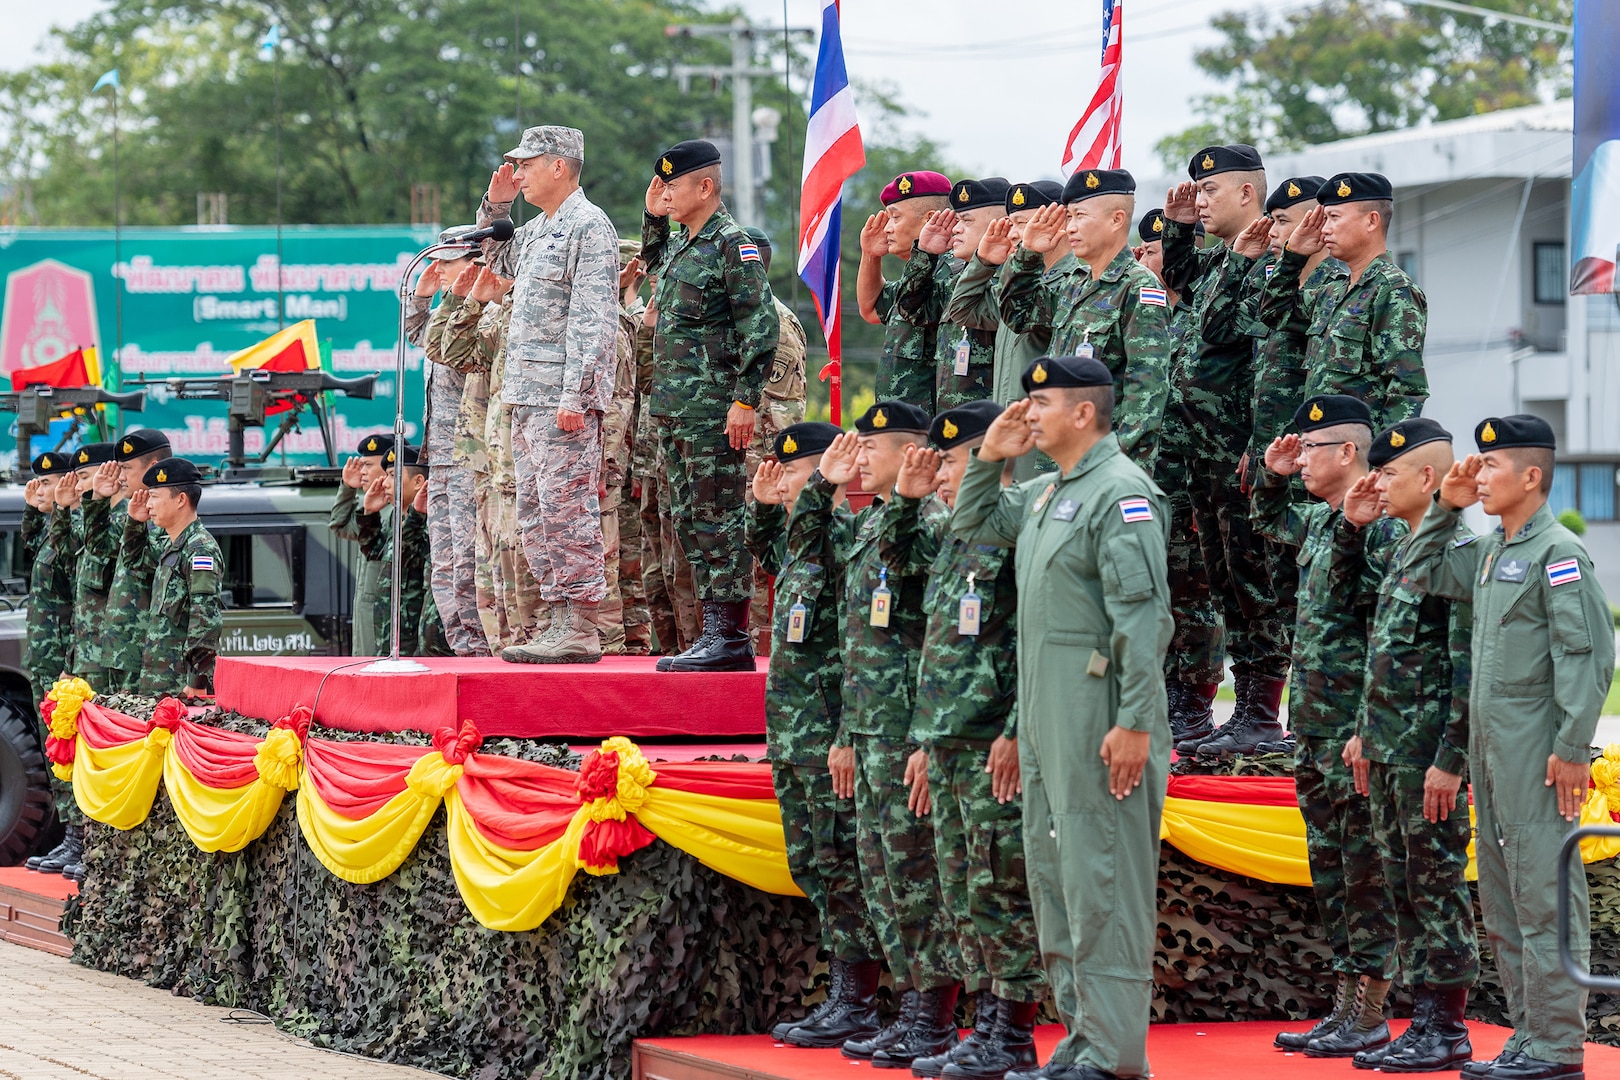 More than 150 U.S. Army and Army National Guard Soldiers and 300 Royal Thai Army soldiers participated in Hanuman Guardian 2018’s opening ceremony Aug. 20, 2018, at the Royal Thai Army’s Cavalry Center in Thailand’s Saraburi province. Hanuman Guardian is an 11-day bilateral army-to-army exercise that strengthens capability and builds interoperability between U.S. and Royal Thai Army forces.